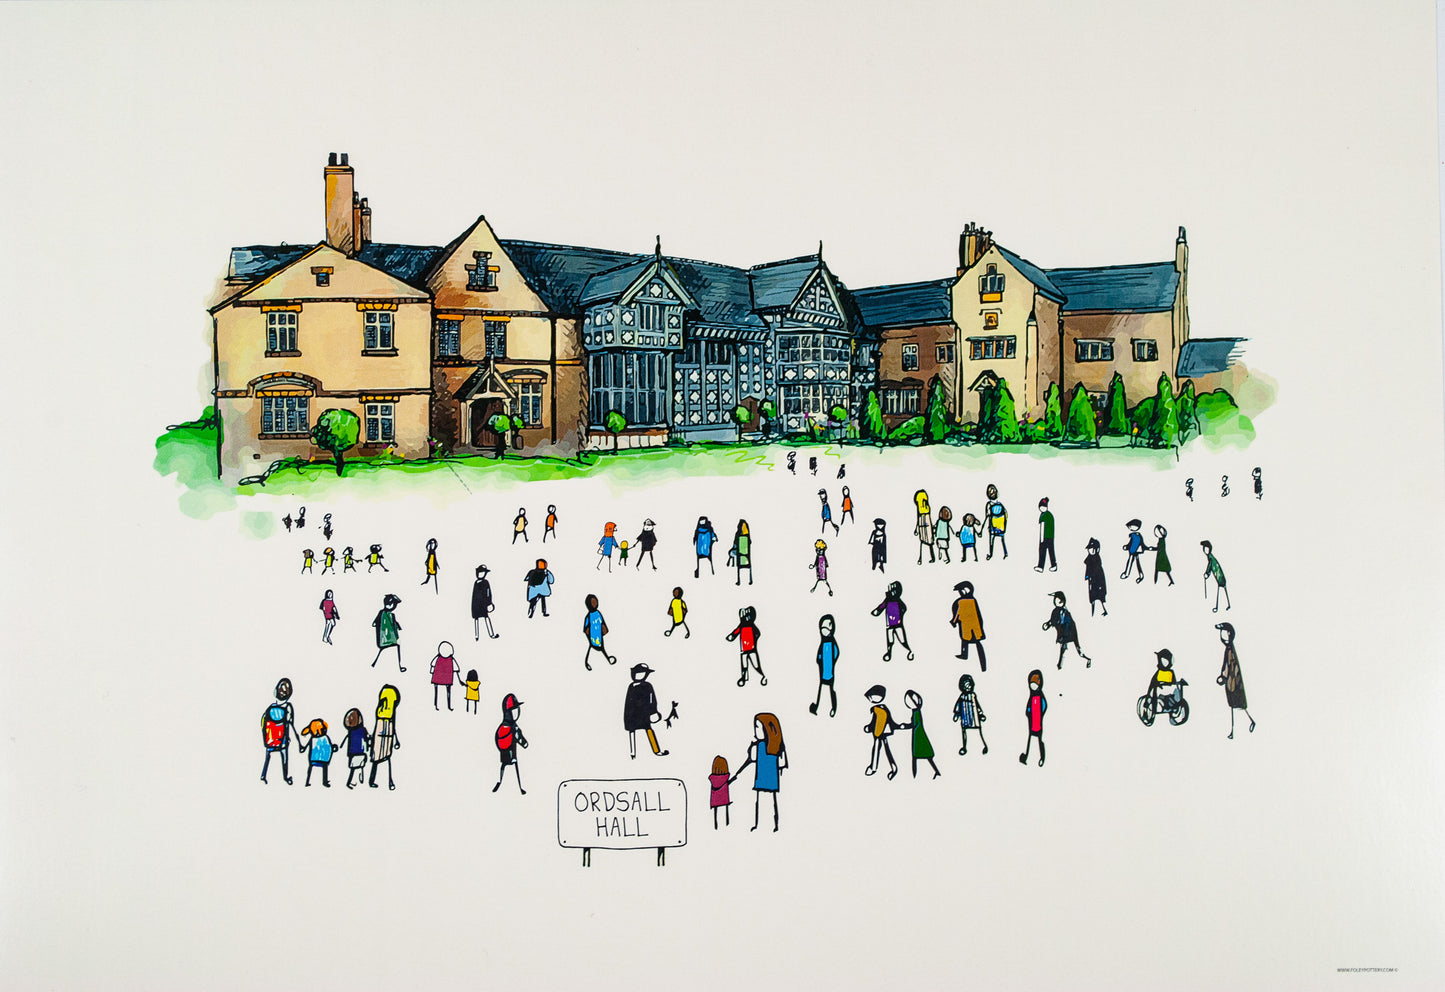 Ordsall Hall Illustrated Print by Foley Pottery